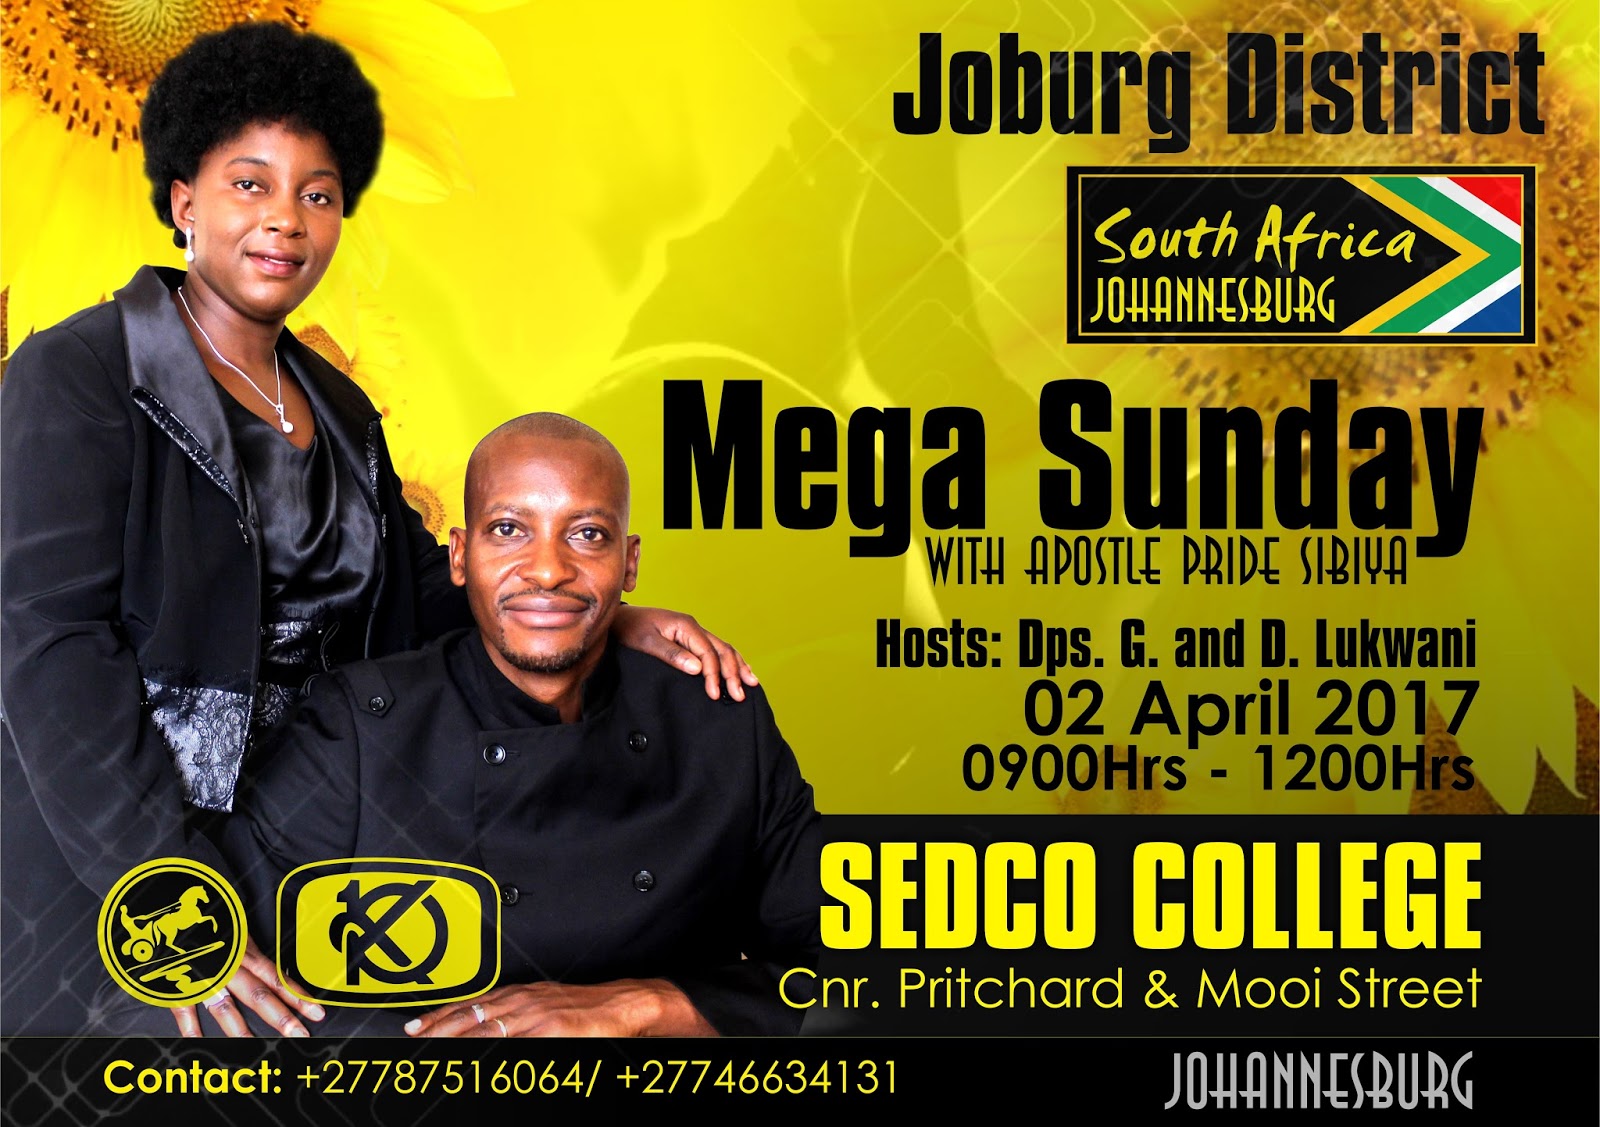 Apostle Pride Sibiya Will Be Ministering In Rustenburg and Johannesburg - South Africa Back To God